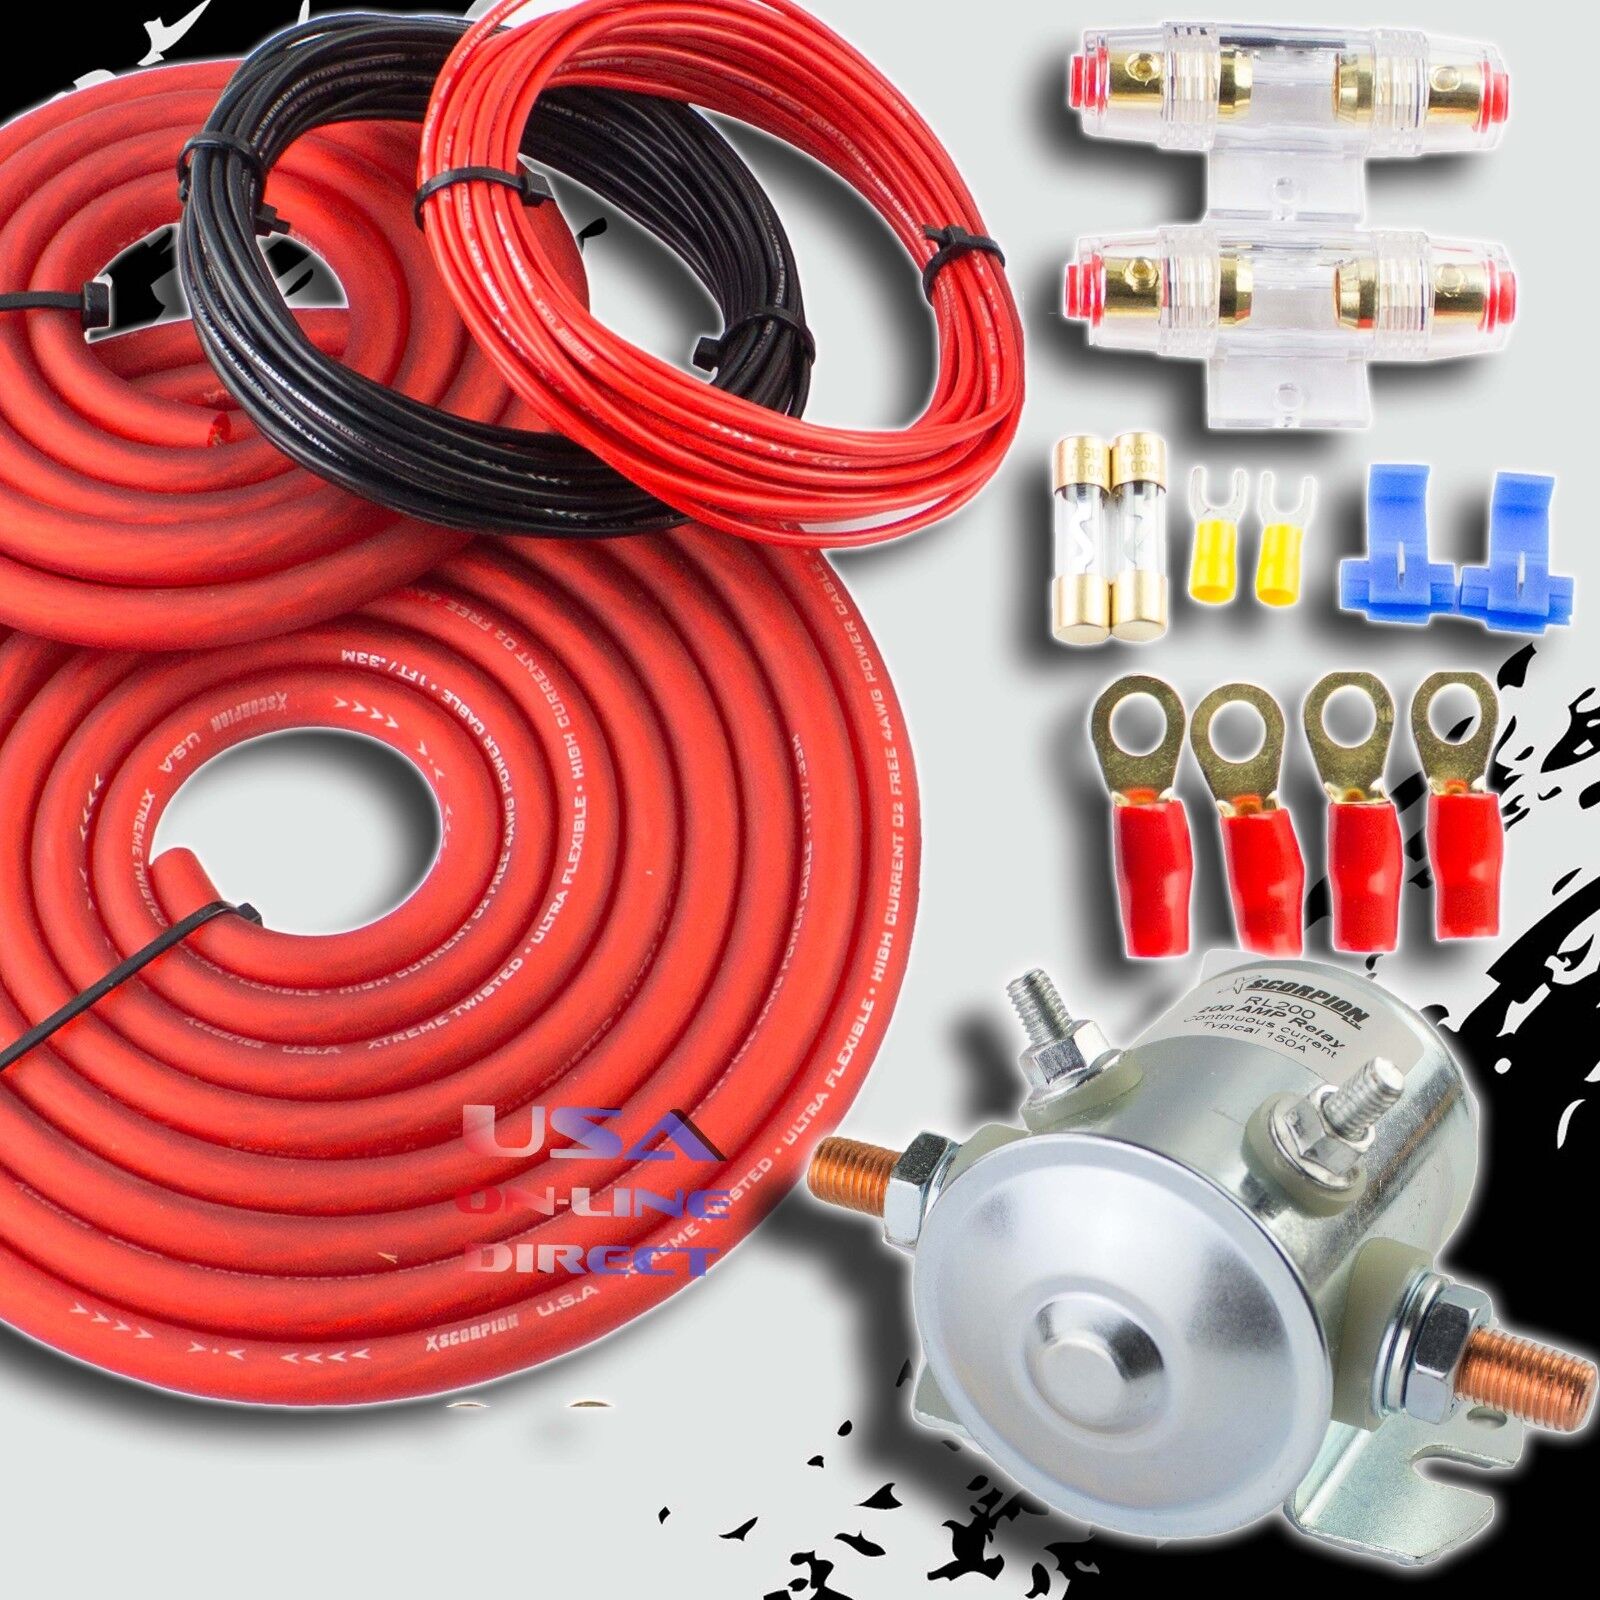 200 AMP HEAVY DUTY DUAL / AUXILIARY BATTERY ISOLATOR COPPER CABLES COMPLETE KIT 